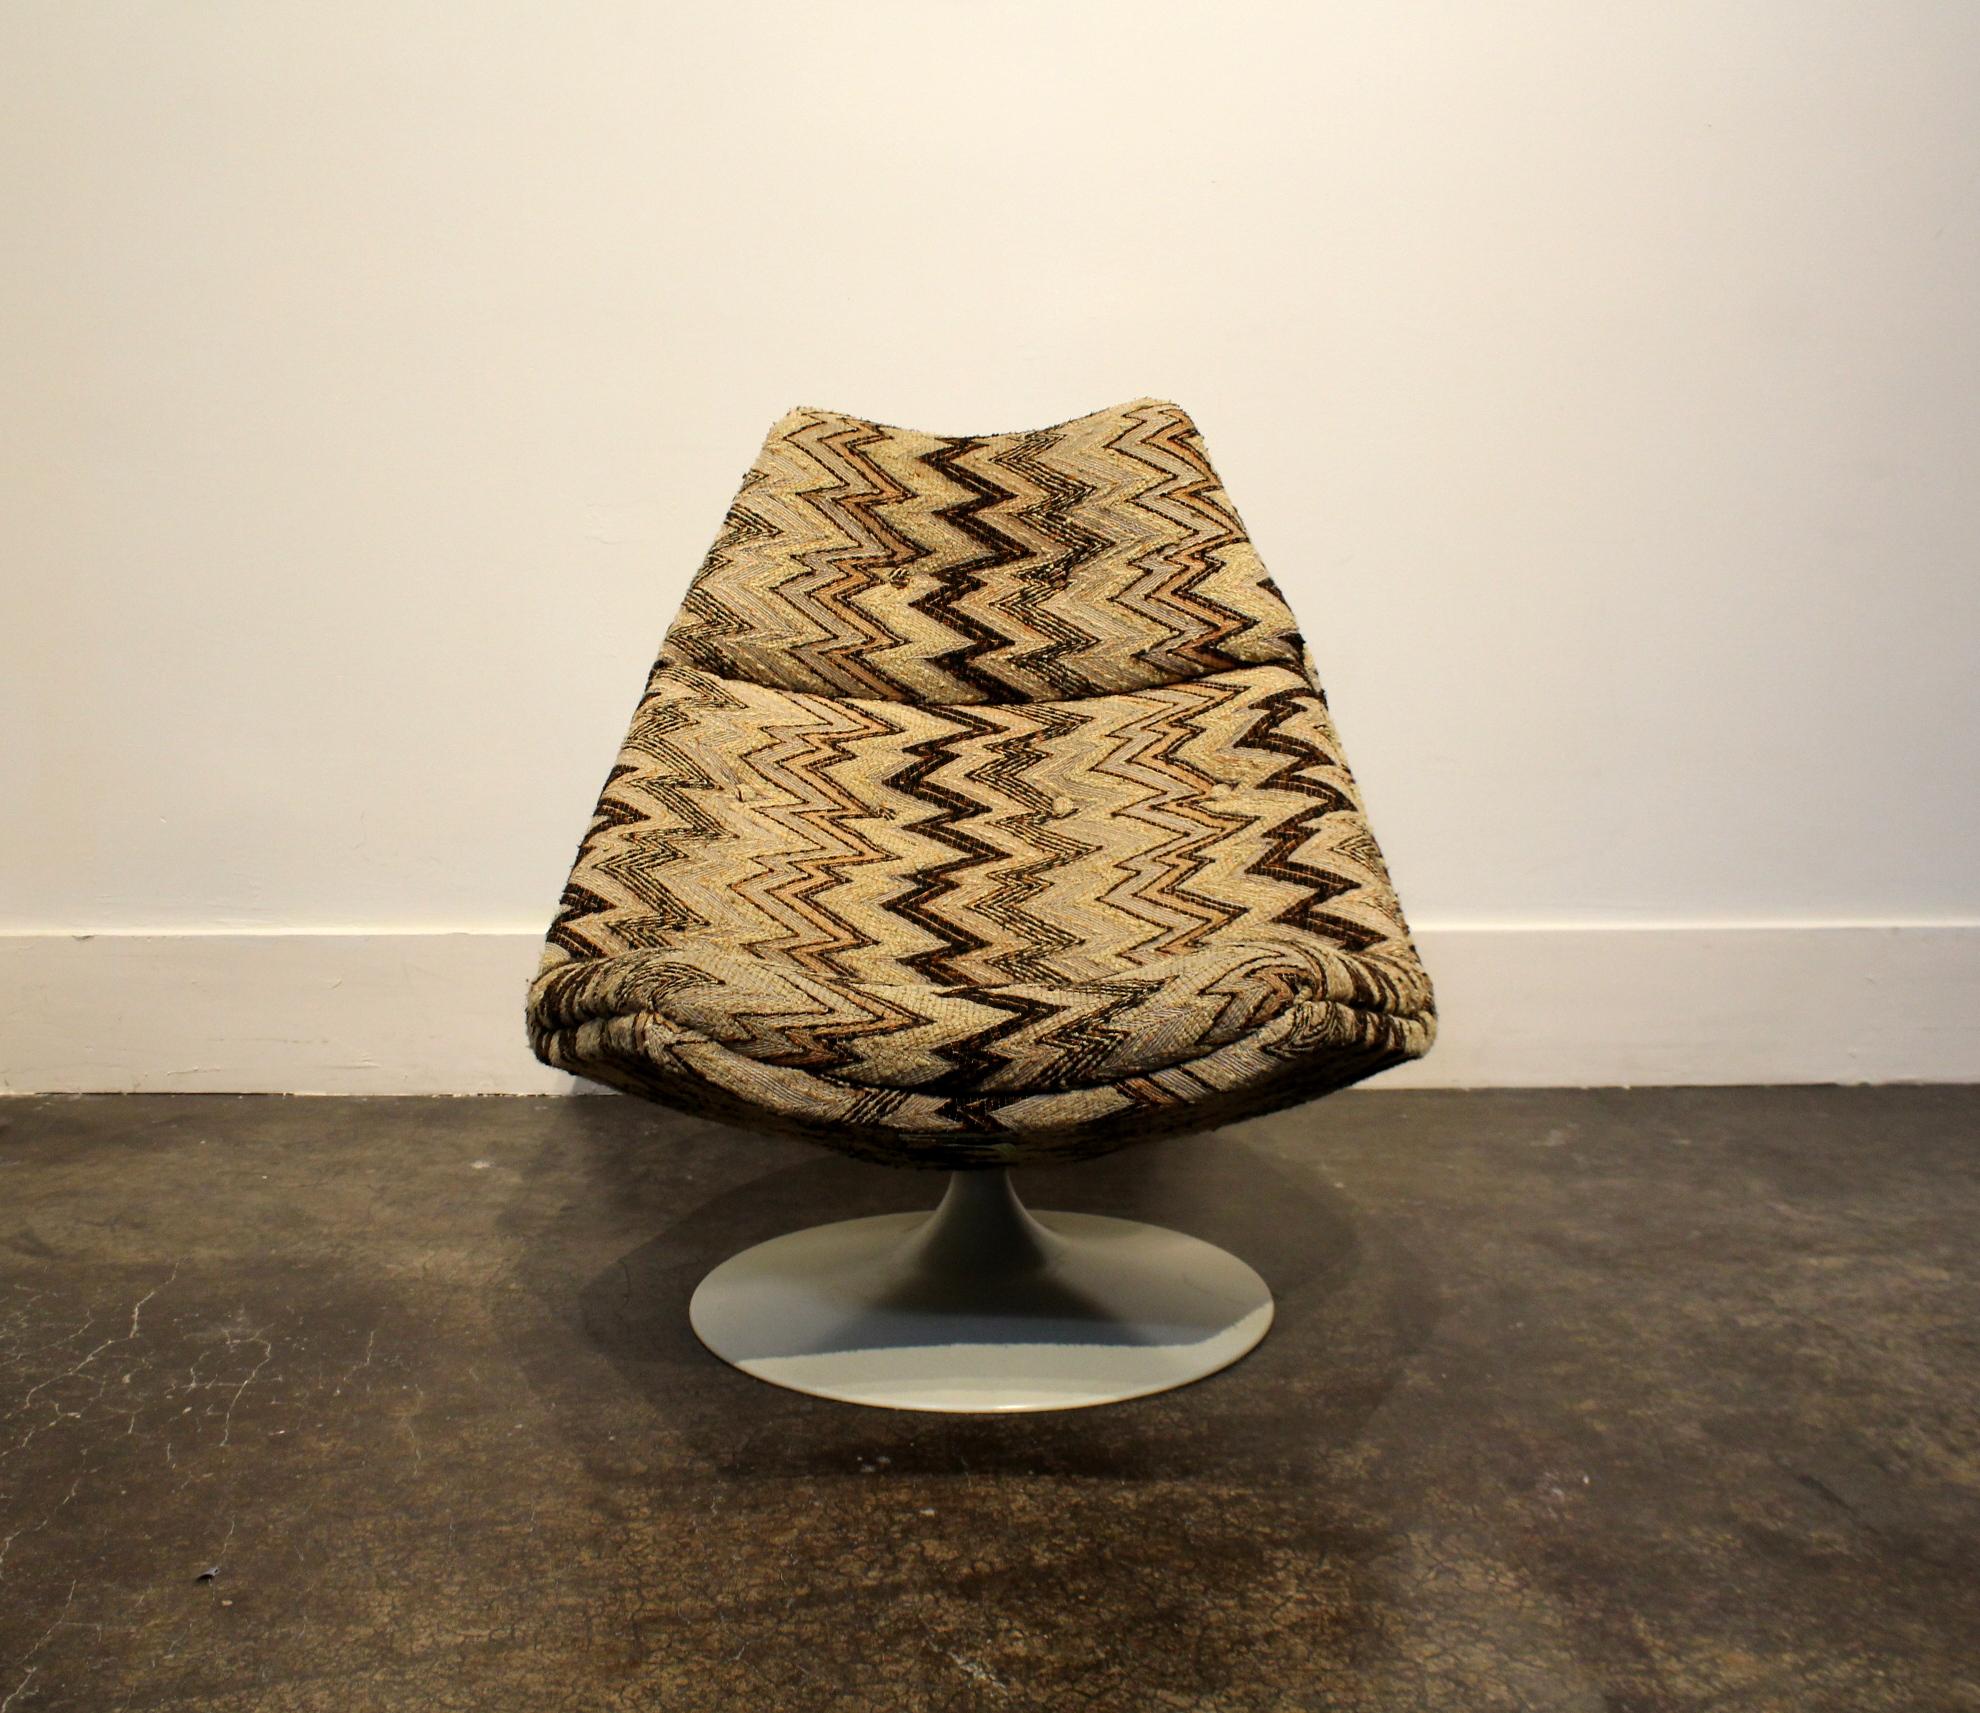 Model F511 lounge chair designed by Geoffrey Harcourt for Artifort in the 1960s. This model was produced in the 1970s and has its original heavy yarn zig-zag upholstery. Base is white plastic.